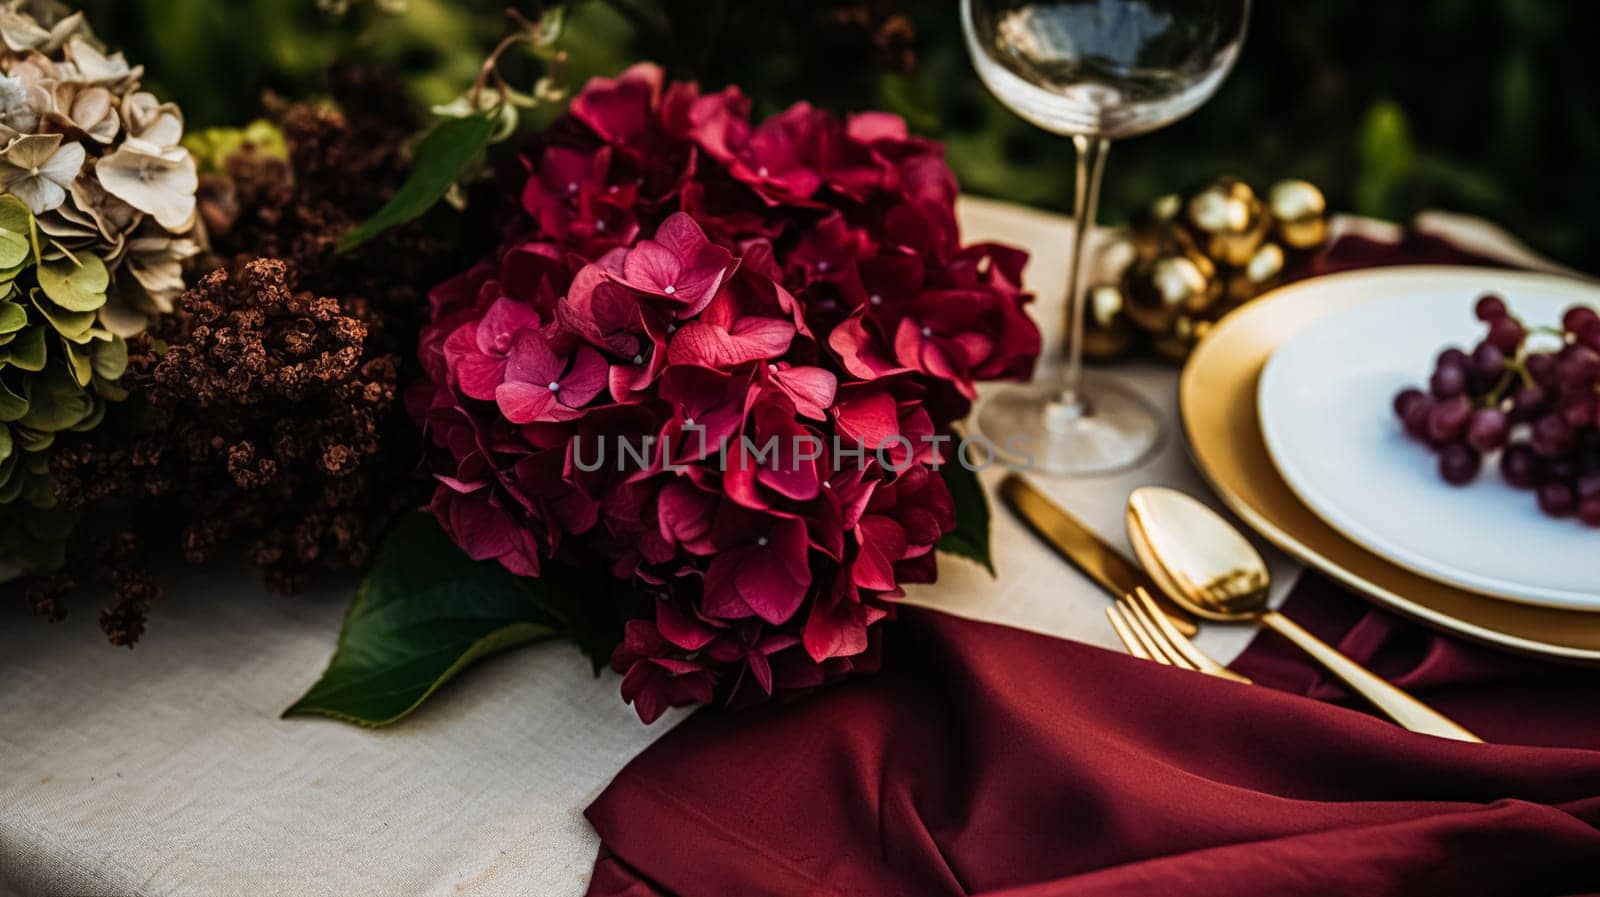 Wedding or formal dinner holiday celebration tablescape with hydrangea flowers in the English countryside garden, table setting and wine, floral table decor for family dinner party, home styling inspiration